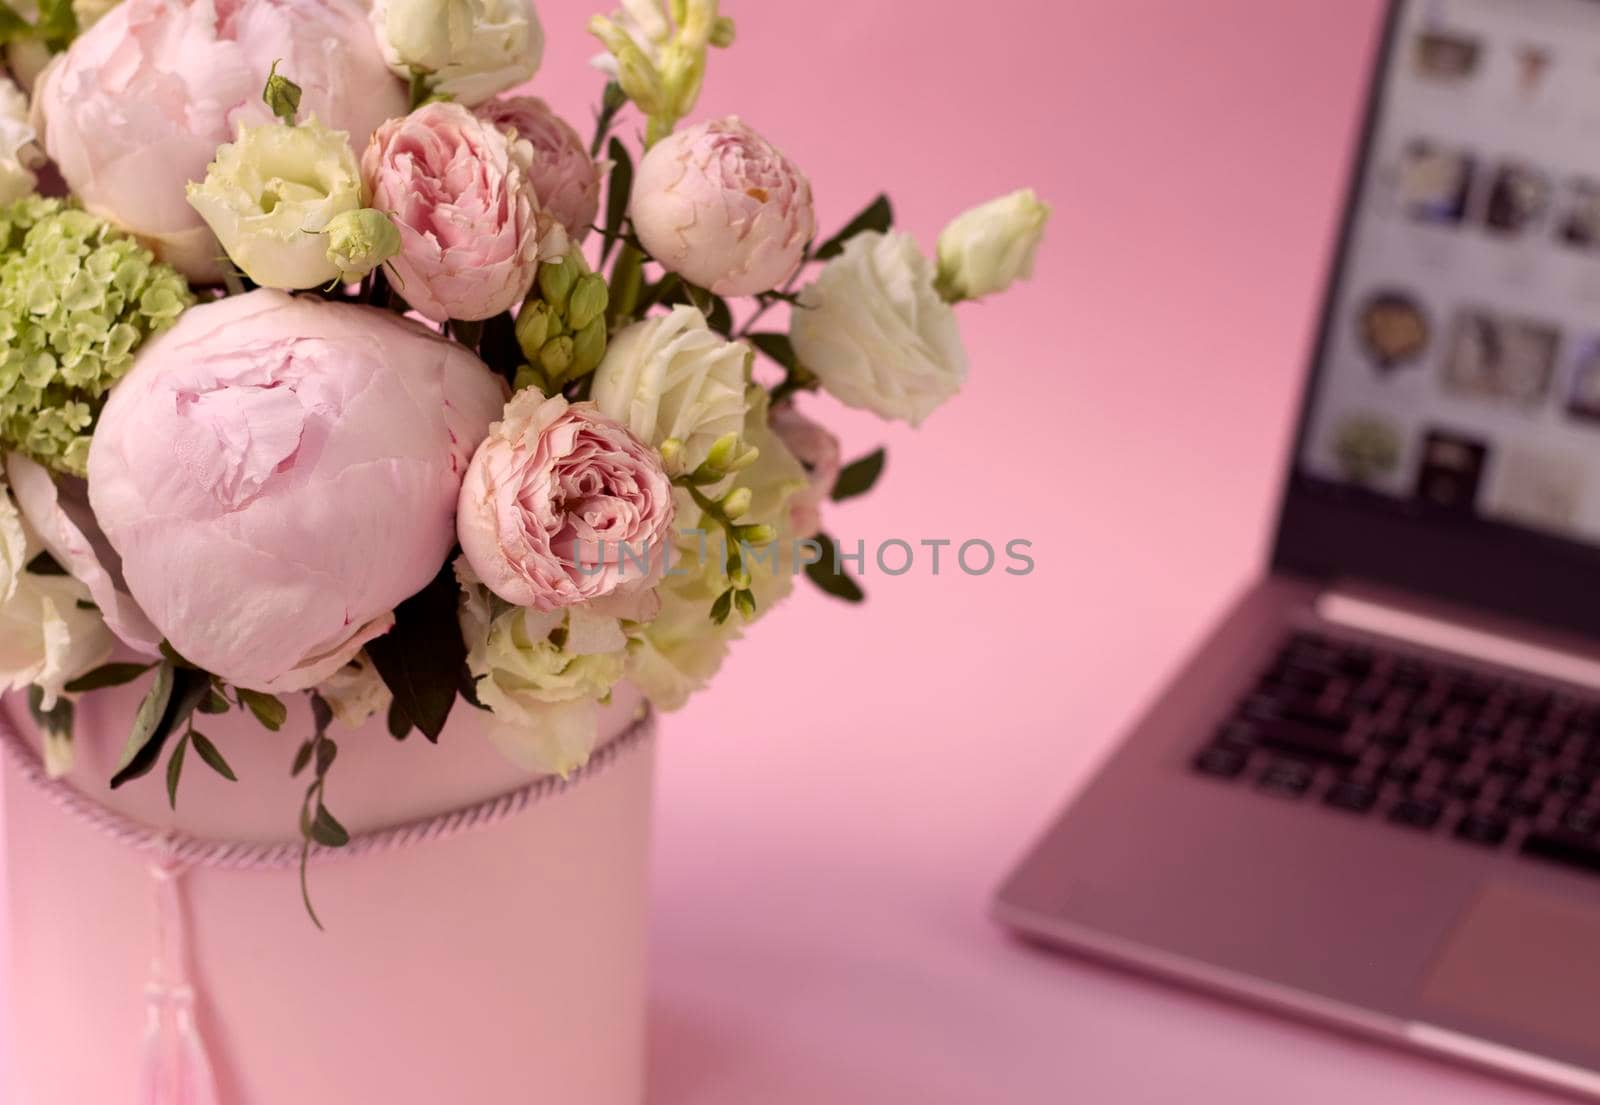 bouquet of flowers in a box close-up, against the background of an open laptop. Selective focus. Hydrangea, roses and peonies on a pink background. home delivery concept, buying flowers online.